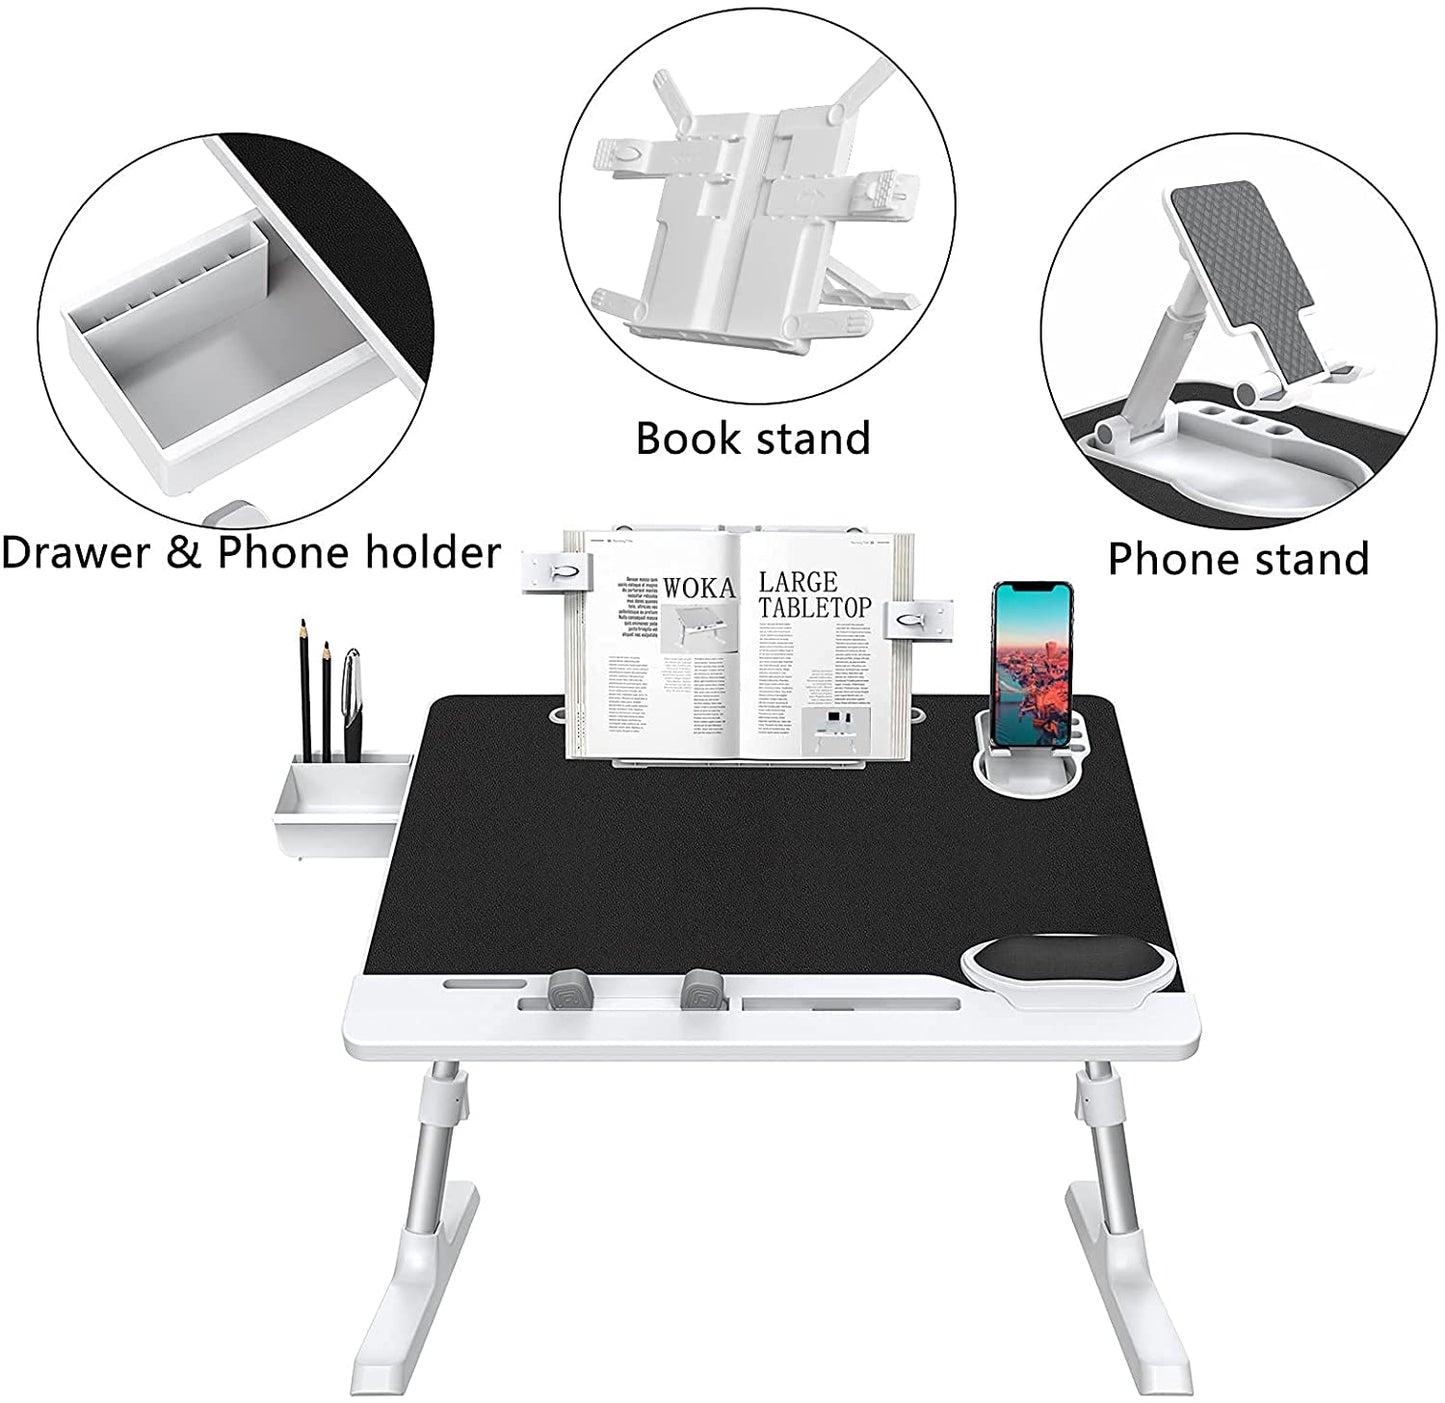 Black lap desk with drawer, book stand, and phone stand